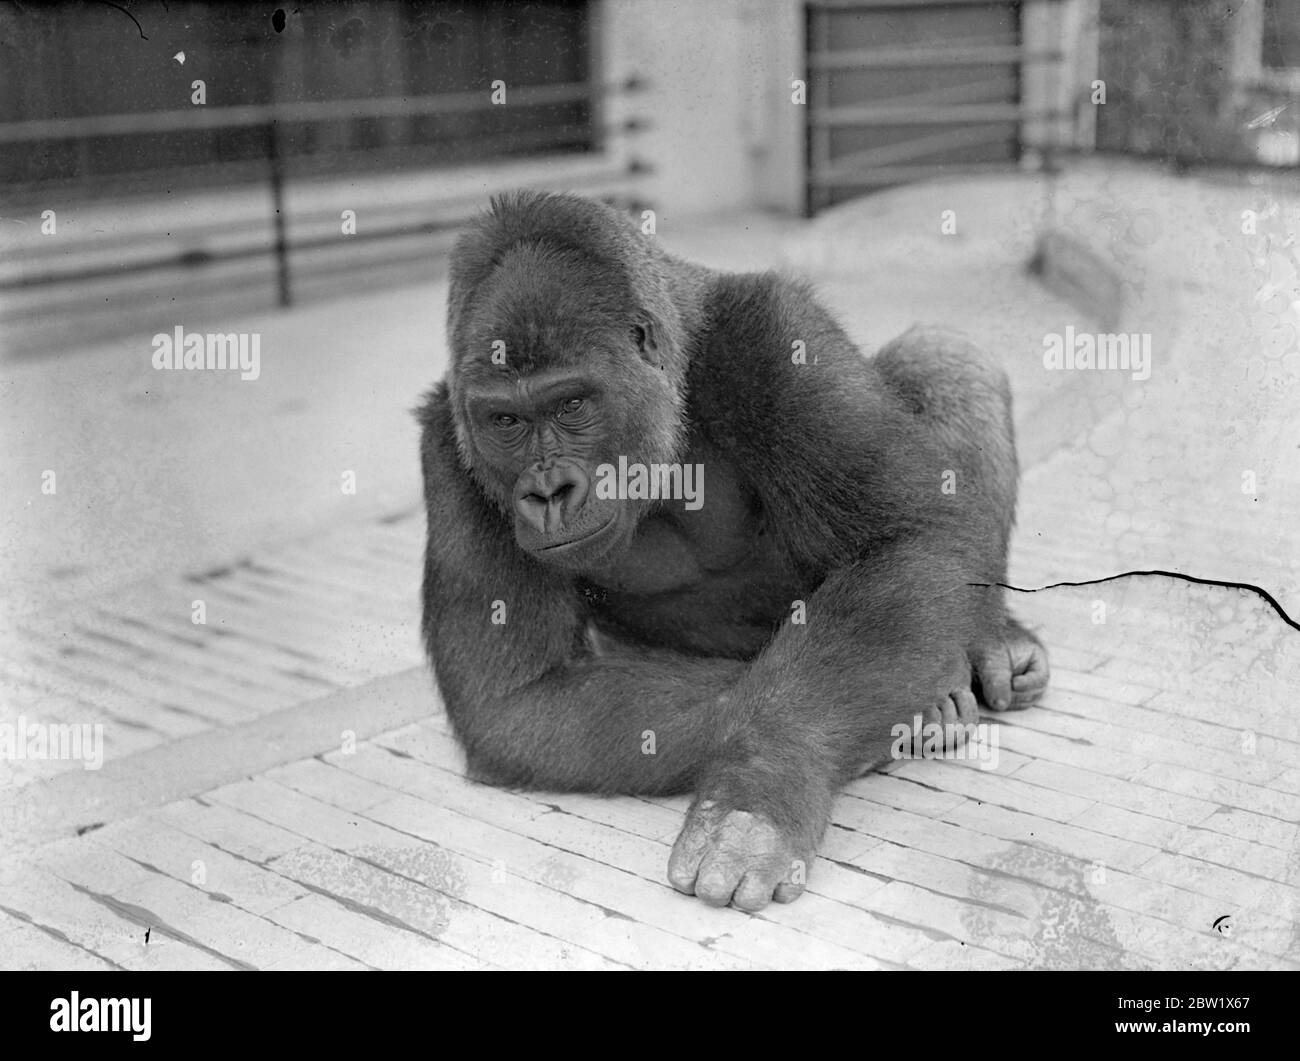 Zoos super heavyweight takes on that 'horizontal' look!. Mok , the London zoo's gorilla, who represents 274 lbs of brawn, turns a somewhat cynical gaze on the world from his enclosure when he makes one of his few appearances in the open so far this year. 1 June 1937 Stock Photo